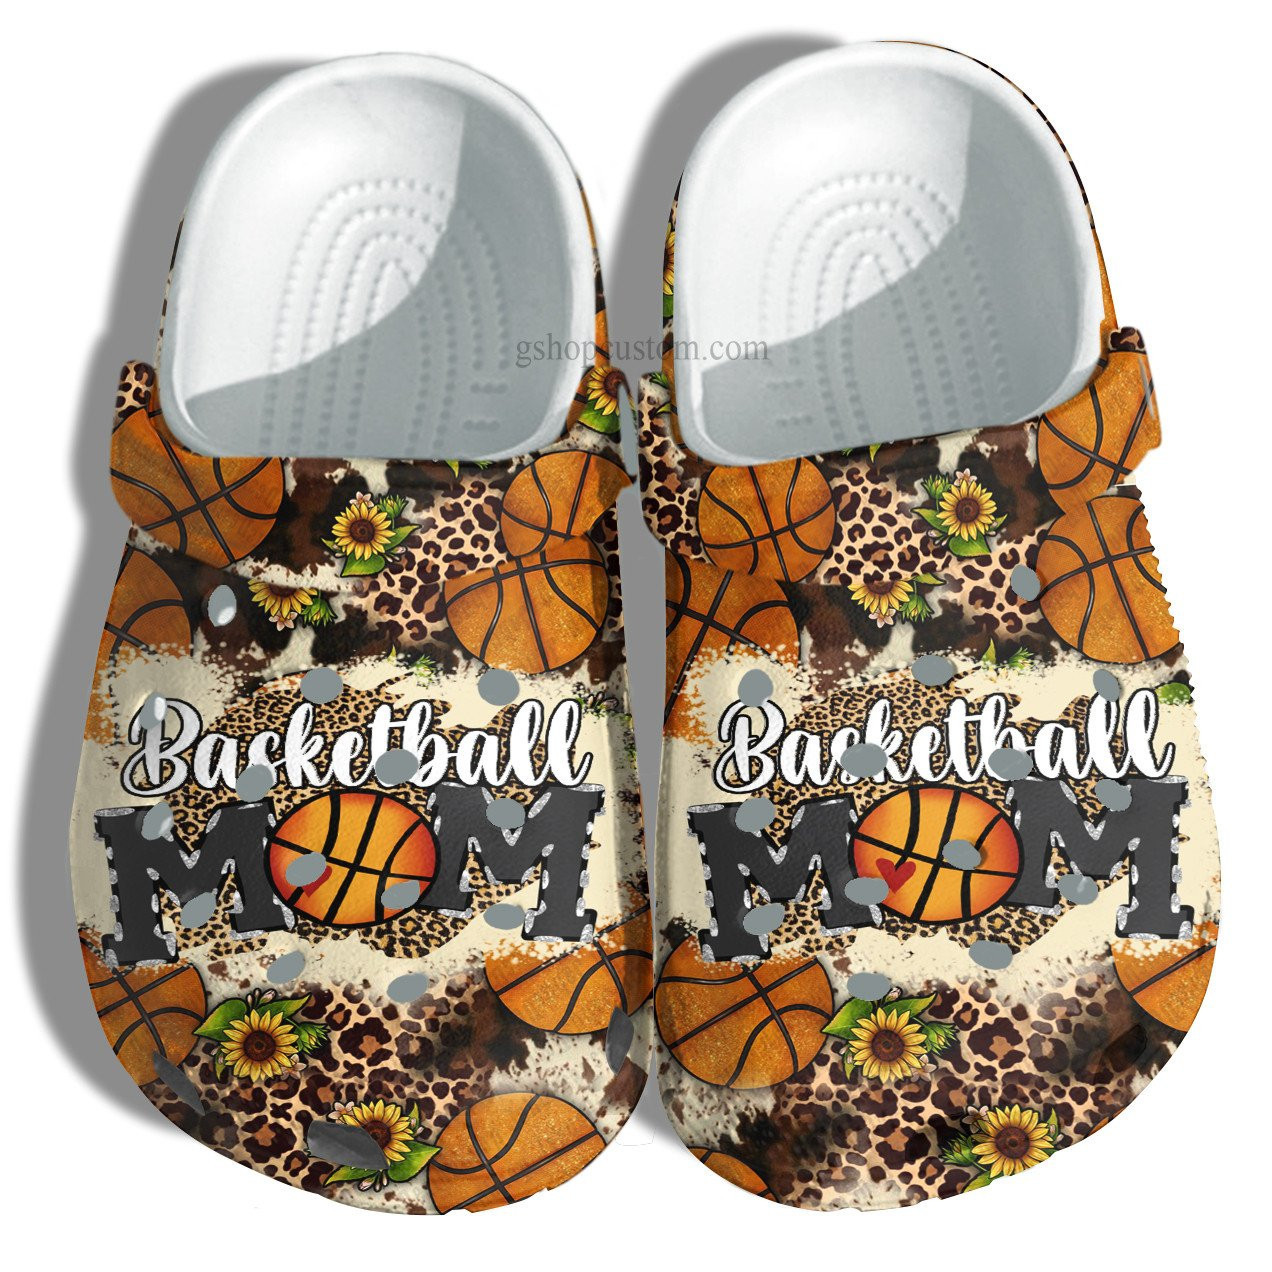 Basketball Mom Croc Crocs Clog Shoes Leopard Sunflower Style - Basketball Cheer Up Daughter Player Mom Crocs Clog Shoes Gift Mommy Birthday